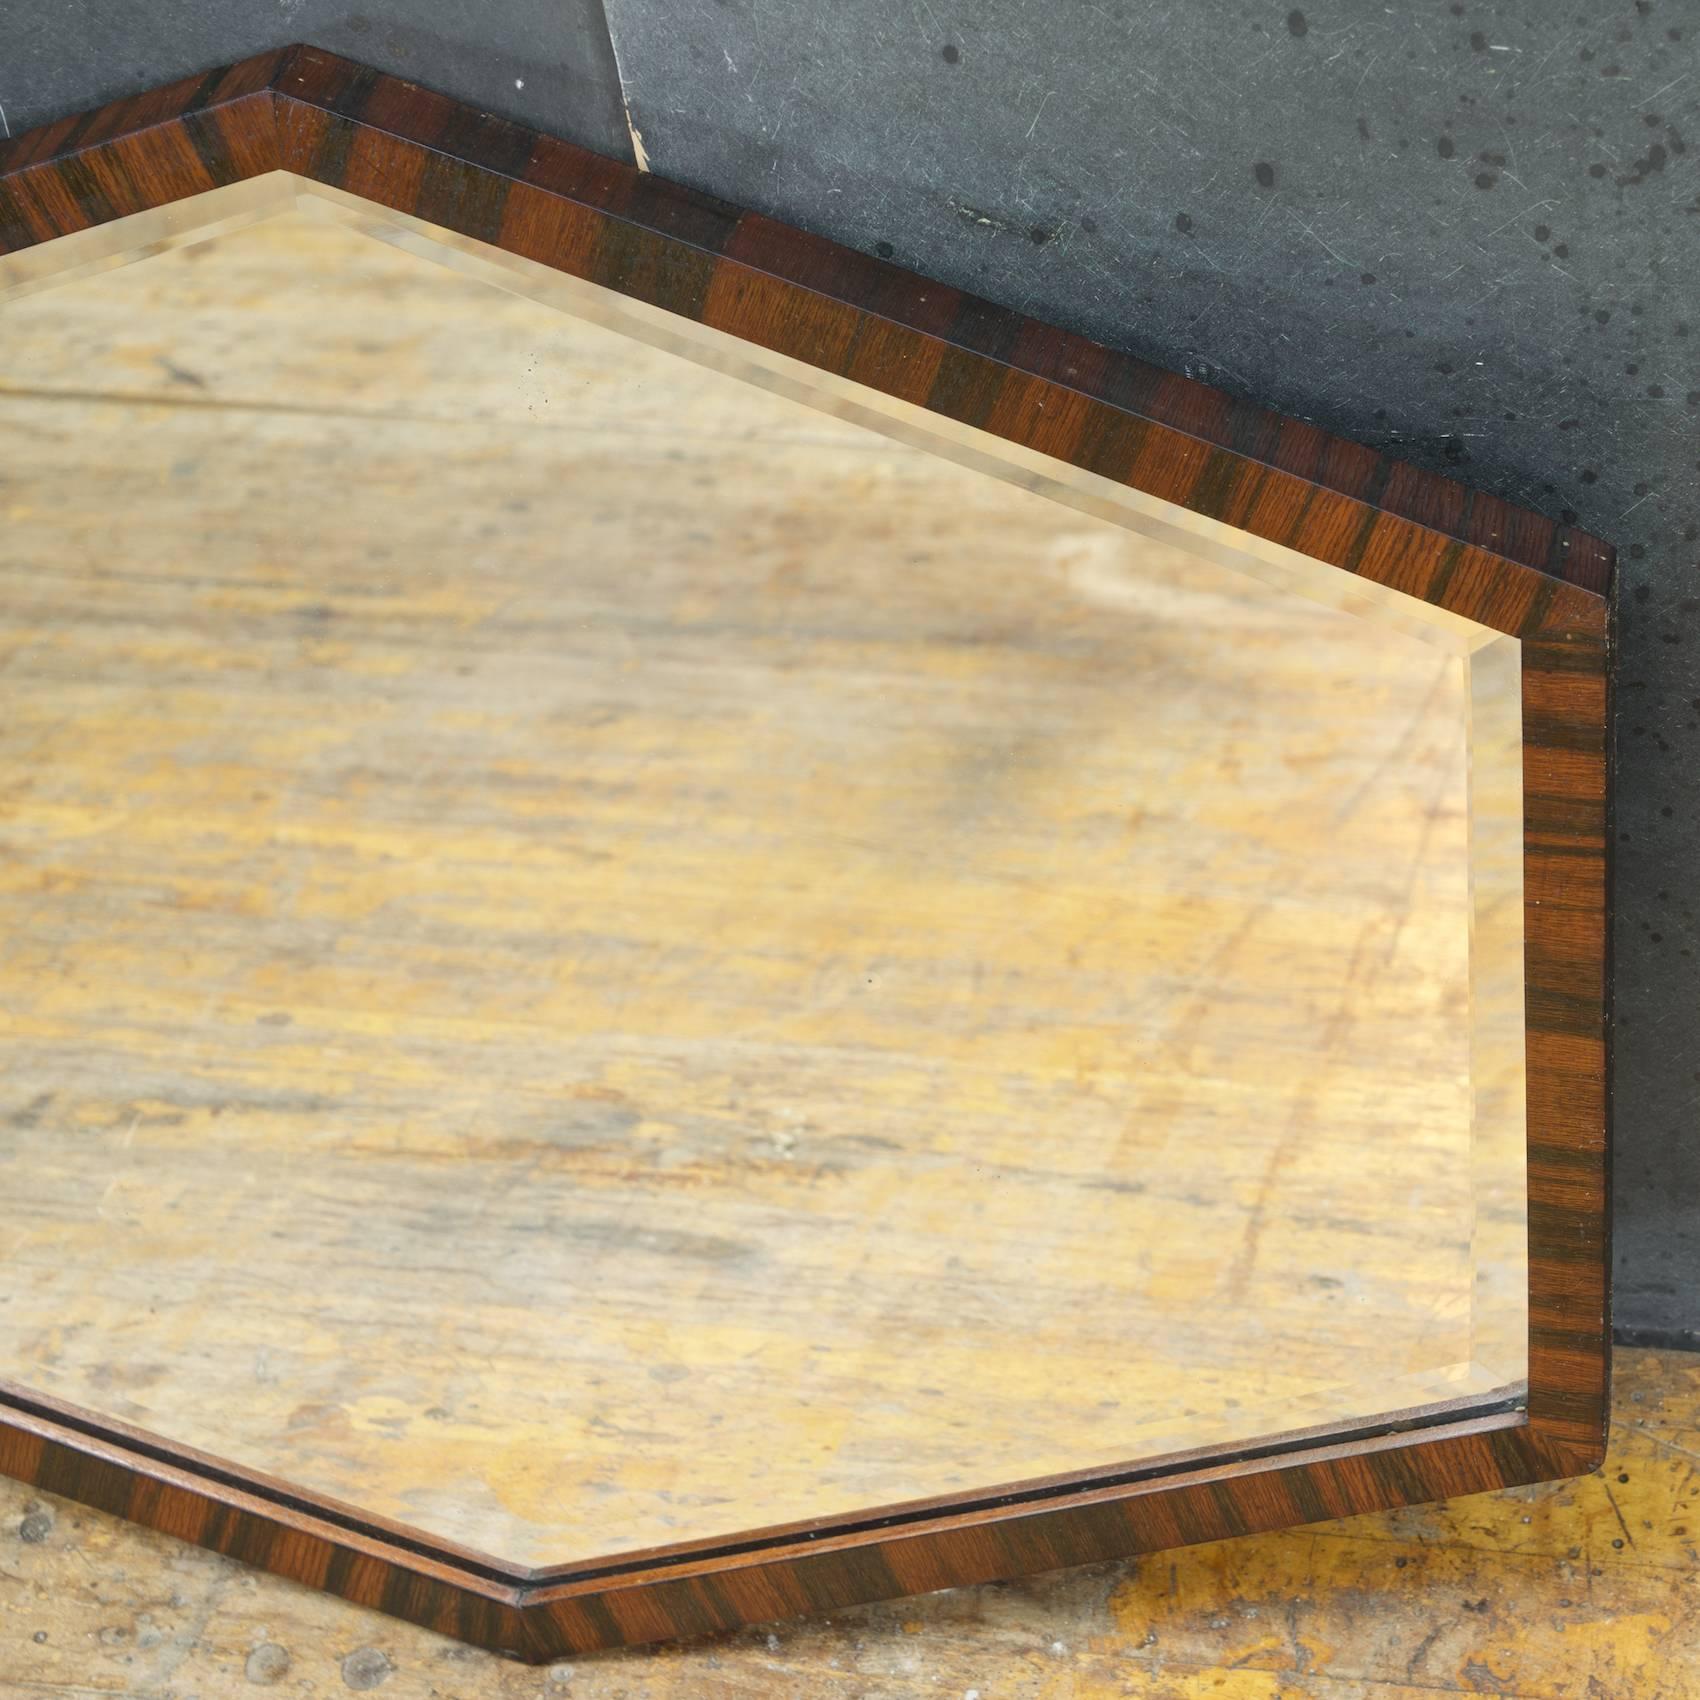 Unusual Art Deco Wall Mirror Optical Illusion Hexagonal Unknown Designer In Distressed Condition For Sale In Hyattsville, MD